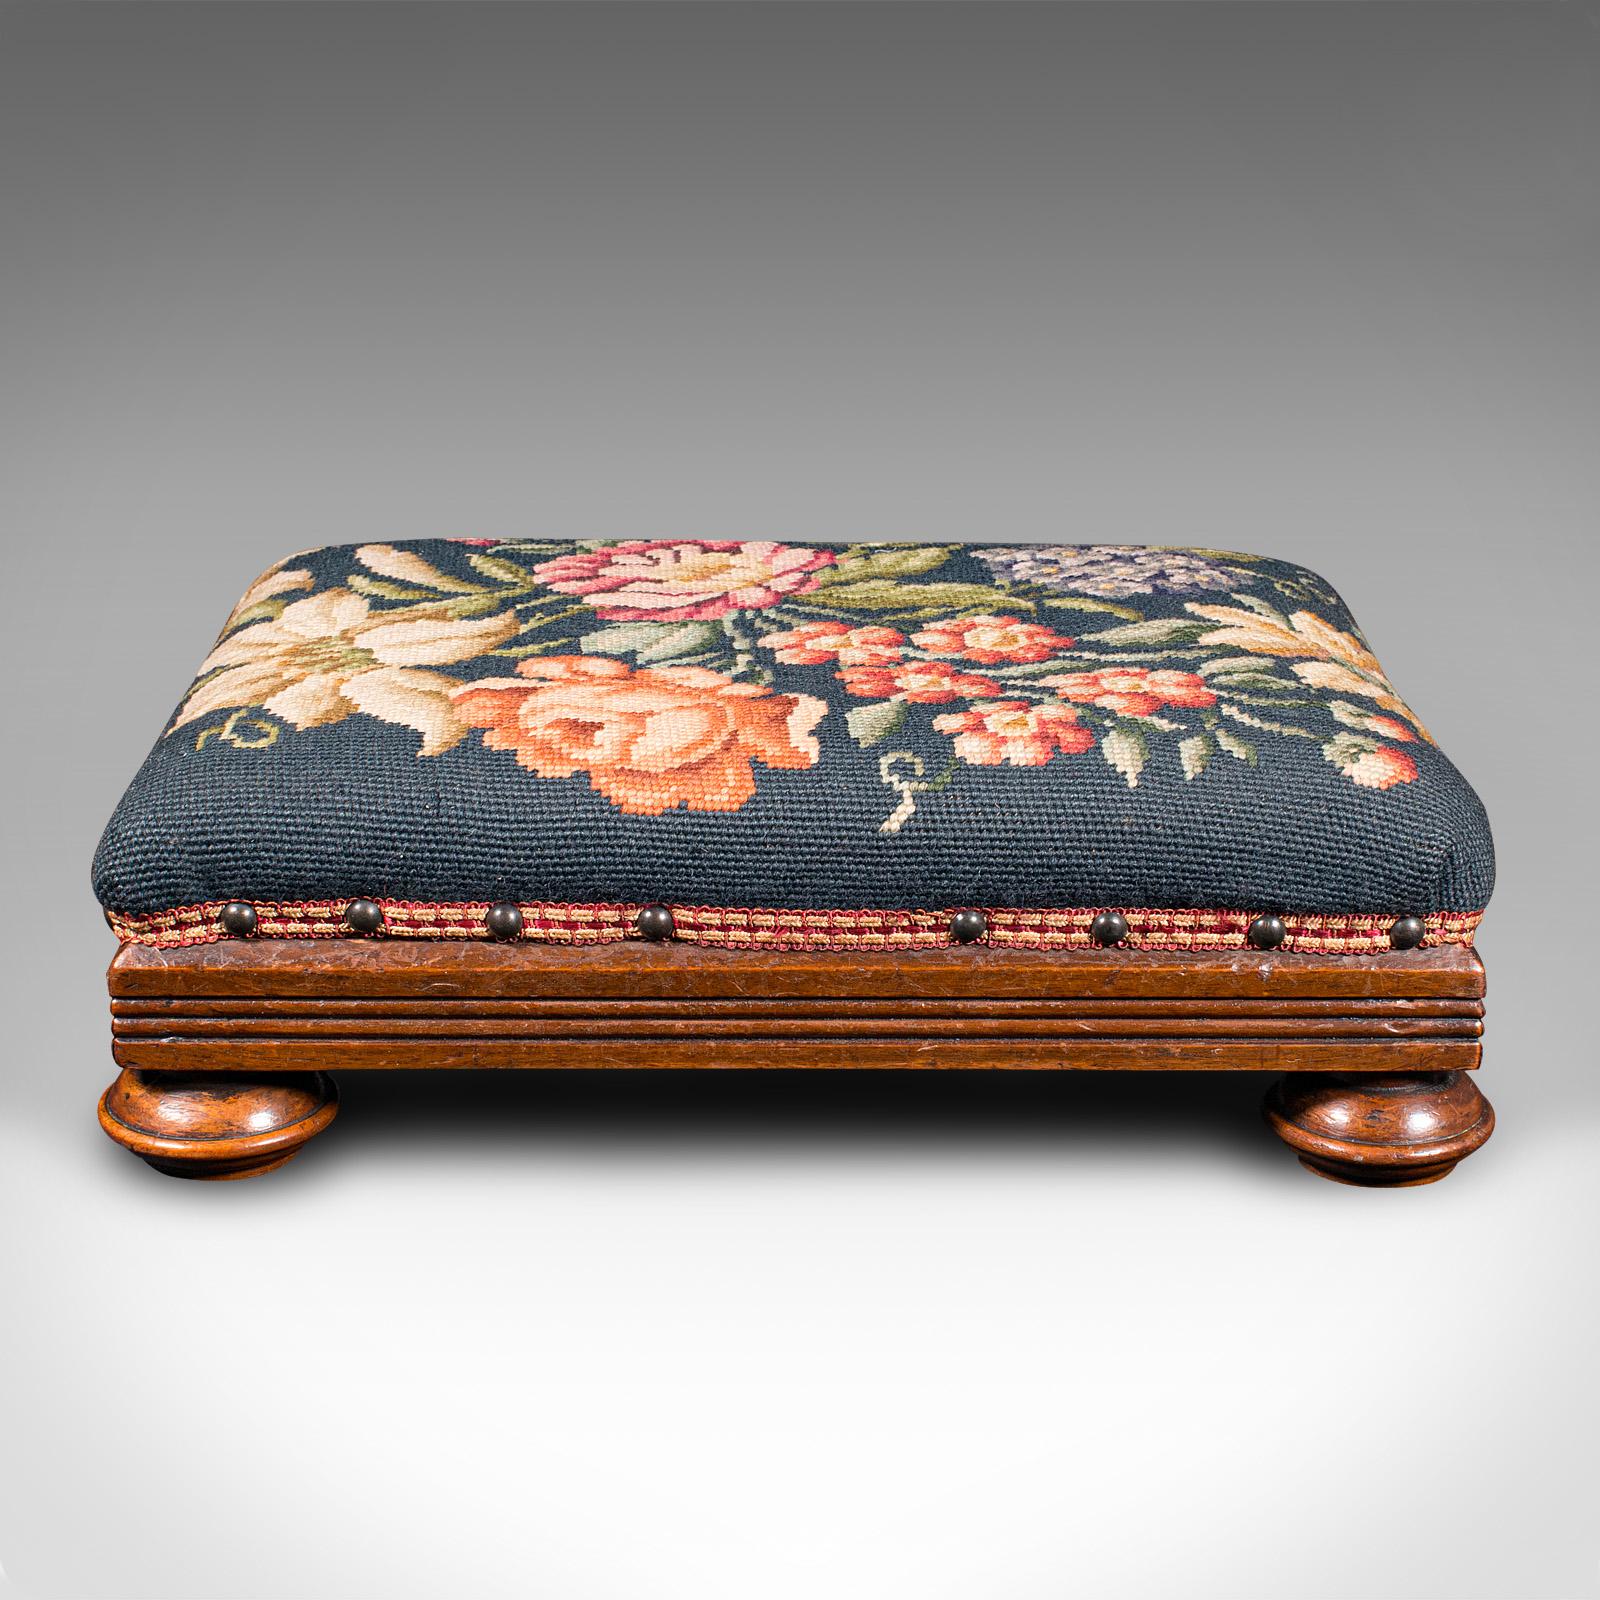 This is an antique footstool. An English, mahogany and needlepoint fireside footrest, dating to the late Victorian period, circa 1880.

Of good proportion with an appealing foliate decor
Displays a desirable aged patina and in good order
Select